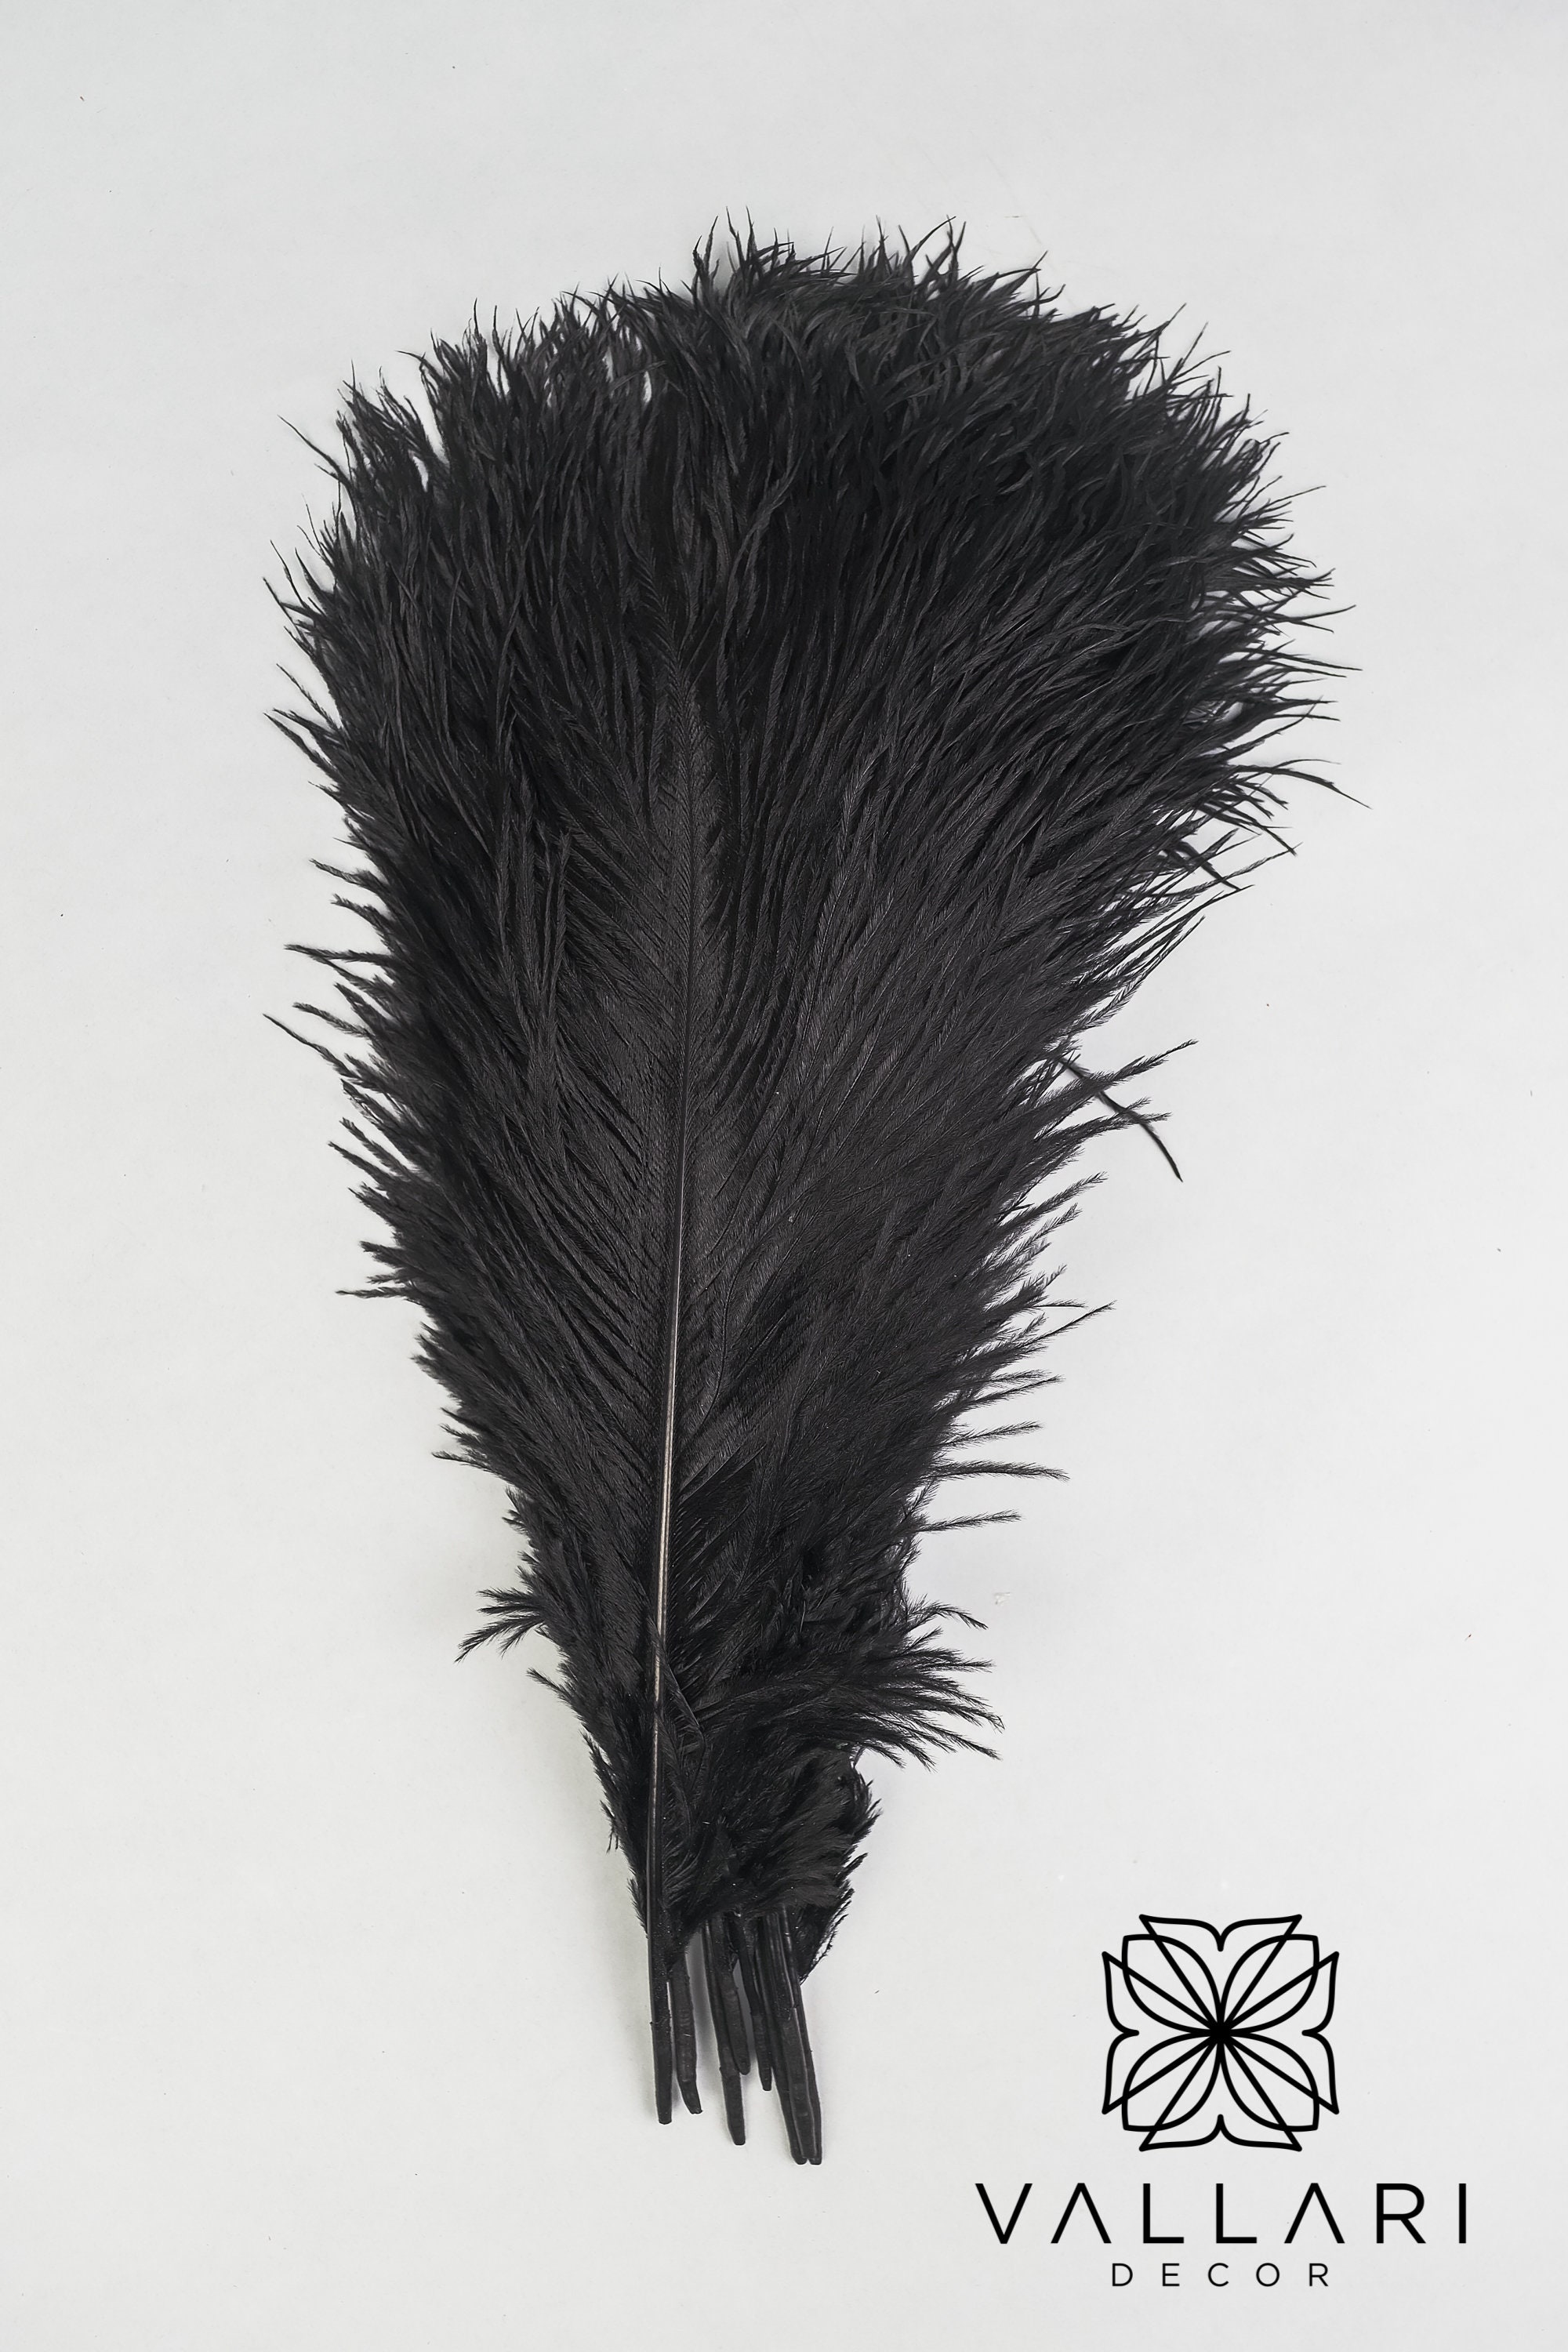 20Pcs/Lot Black Feathers for Crafts Ostrich Rooster Goose Feather Natural  Pluma for DIY Handicraft Accessories